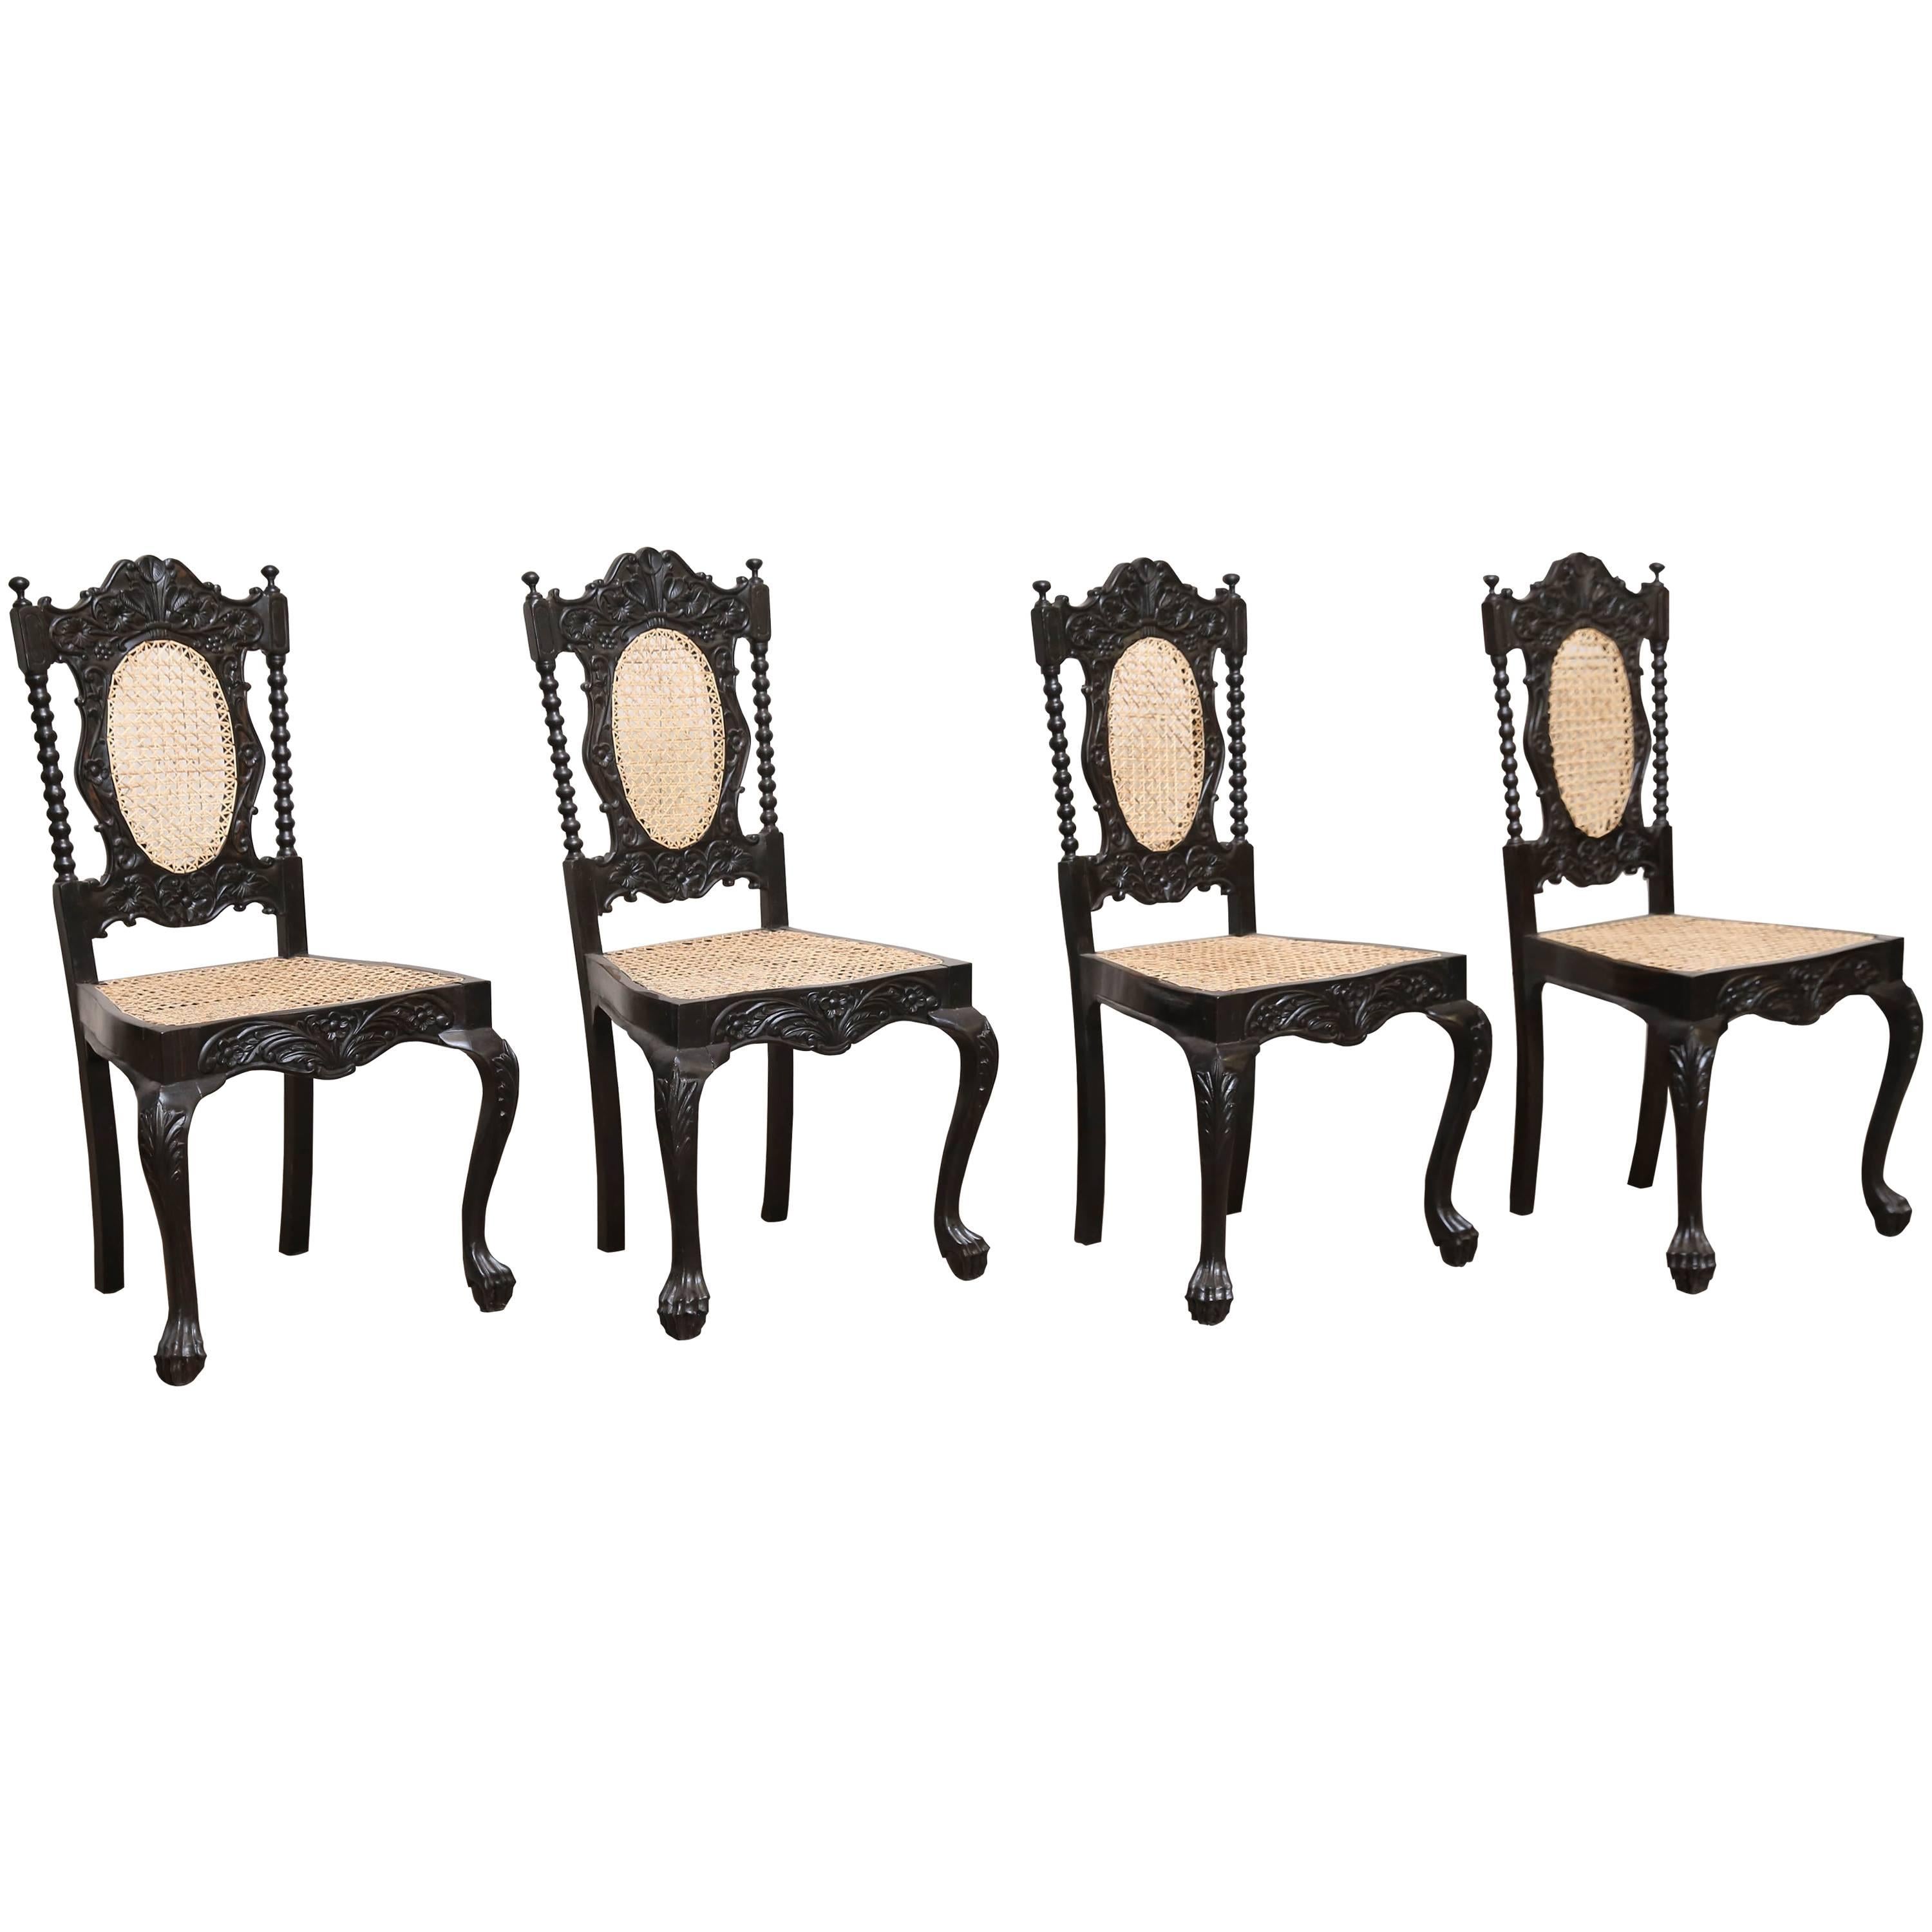 Four Mid-19th Century Exquisitely Carved Solid Ebony and Cane Side Chairs For Sale